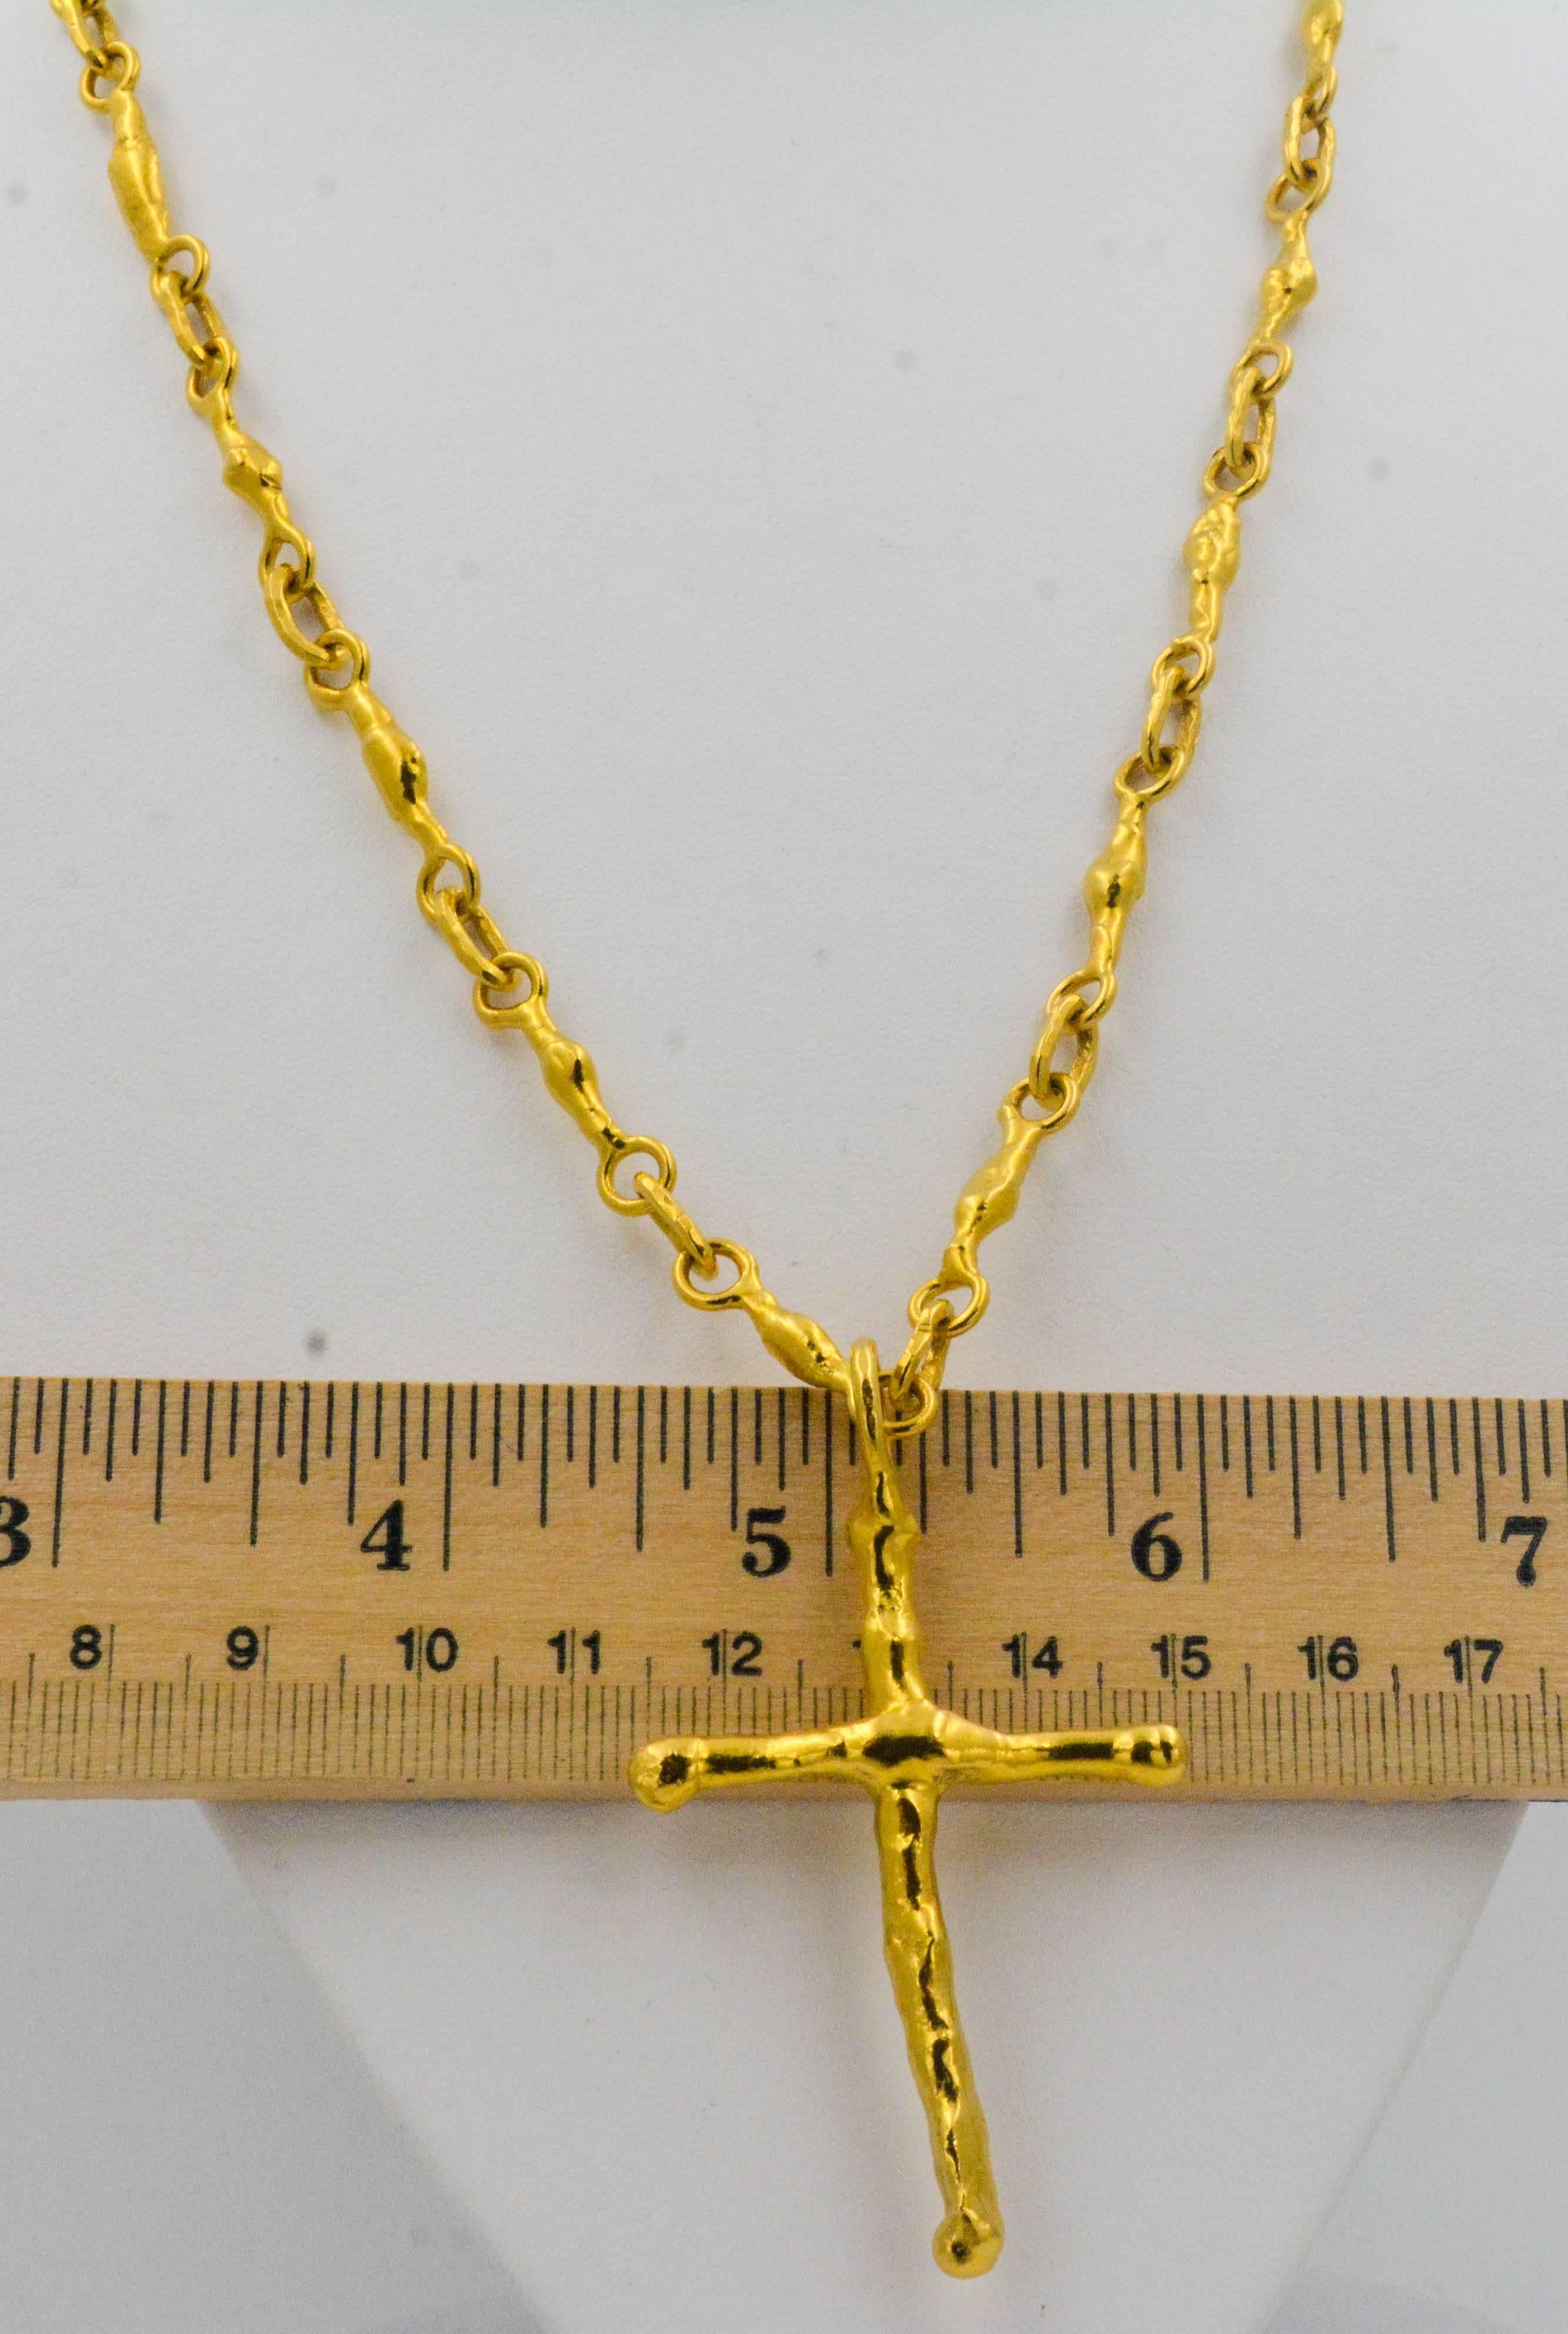 A stunning 1980's Jean Mahie 22 Karat Yellow solid gold cross combined with her signature free form primitive melt design link chain. This unique chain measures 21